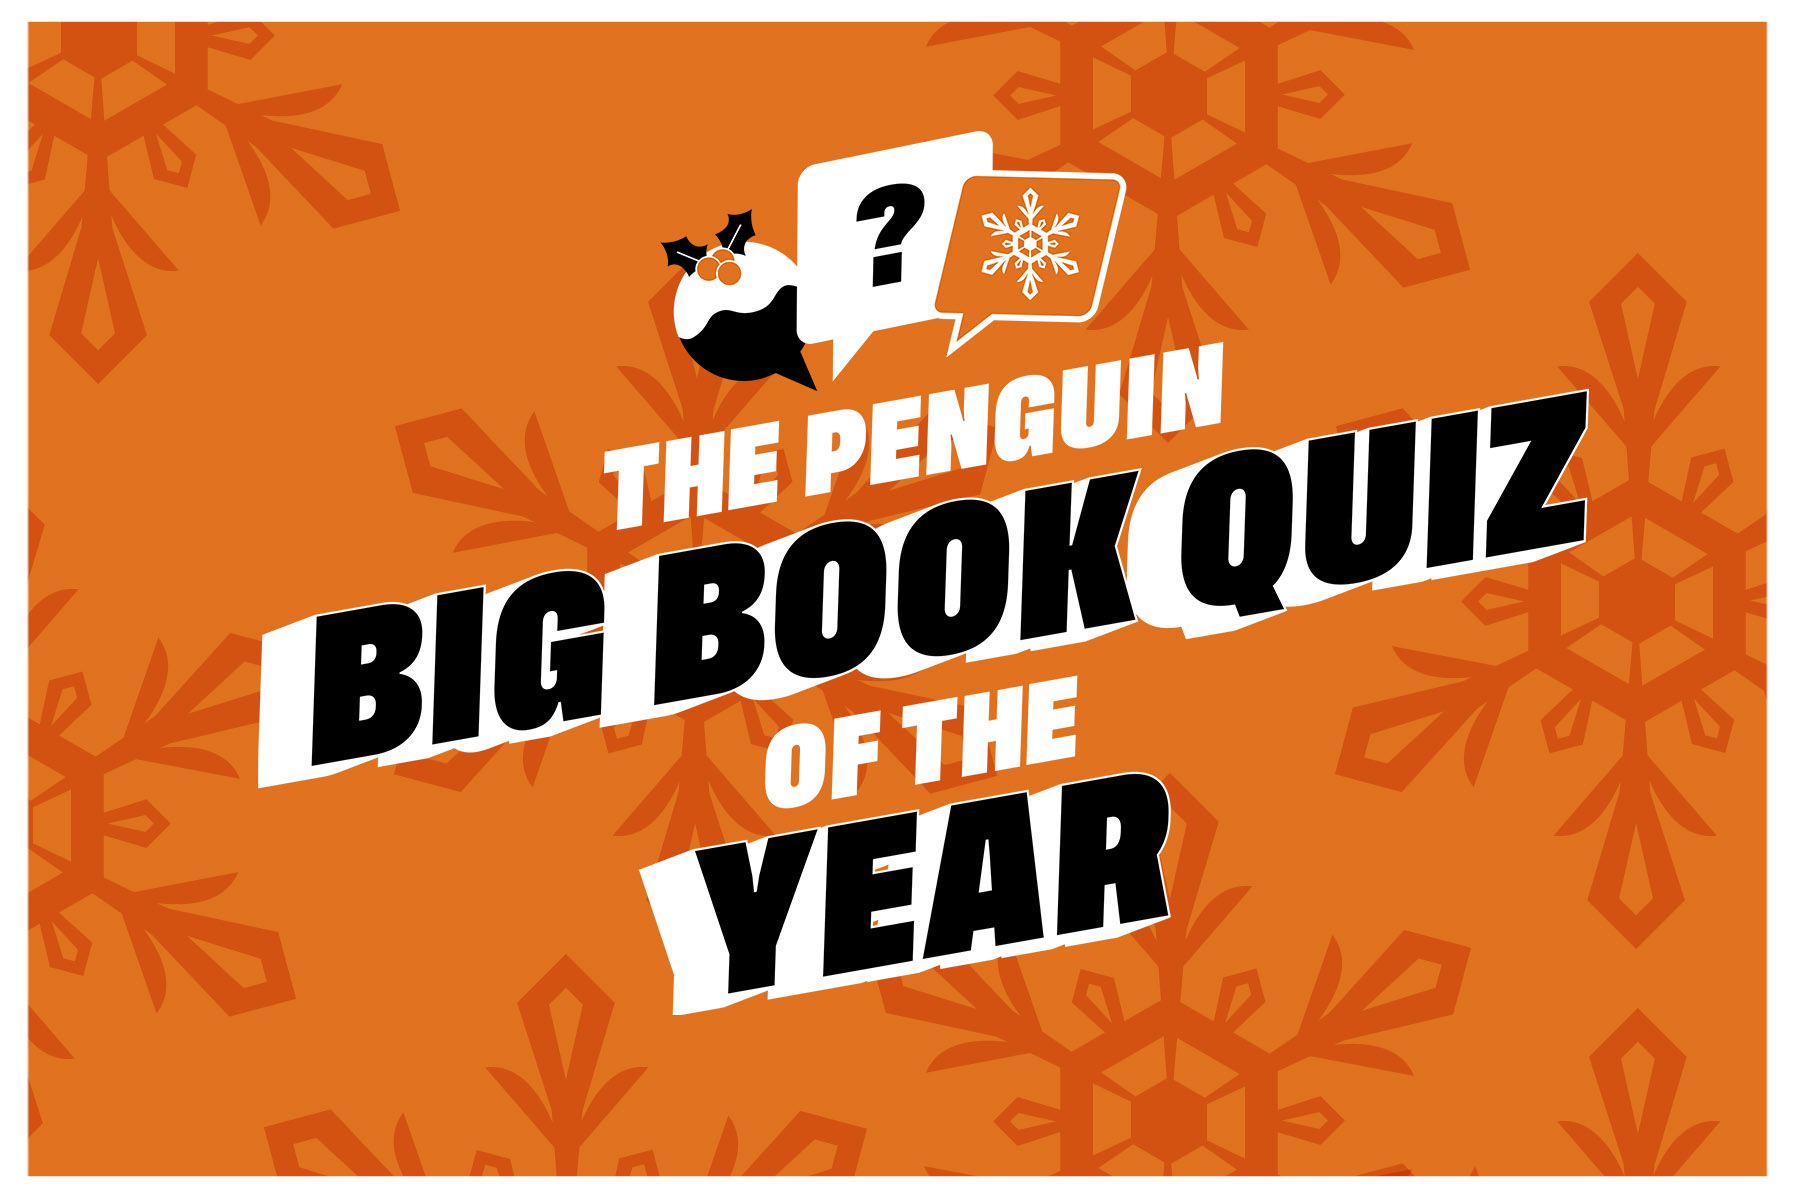 The Penguin Big Book Quiz of the Year